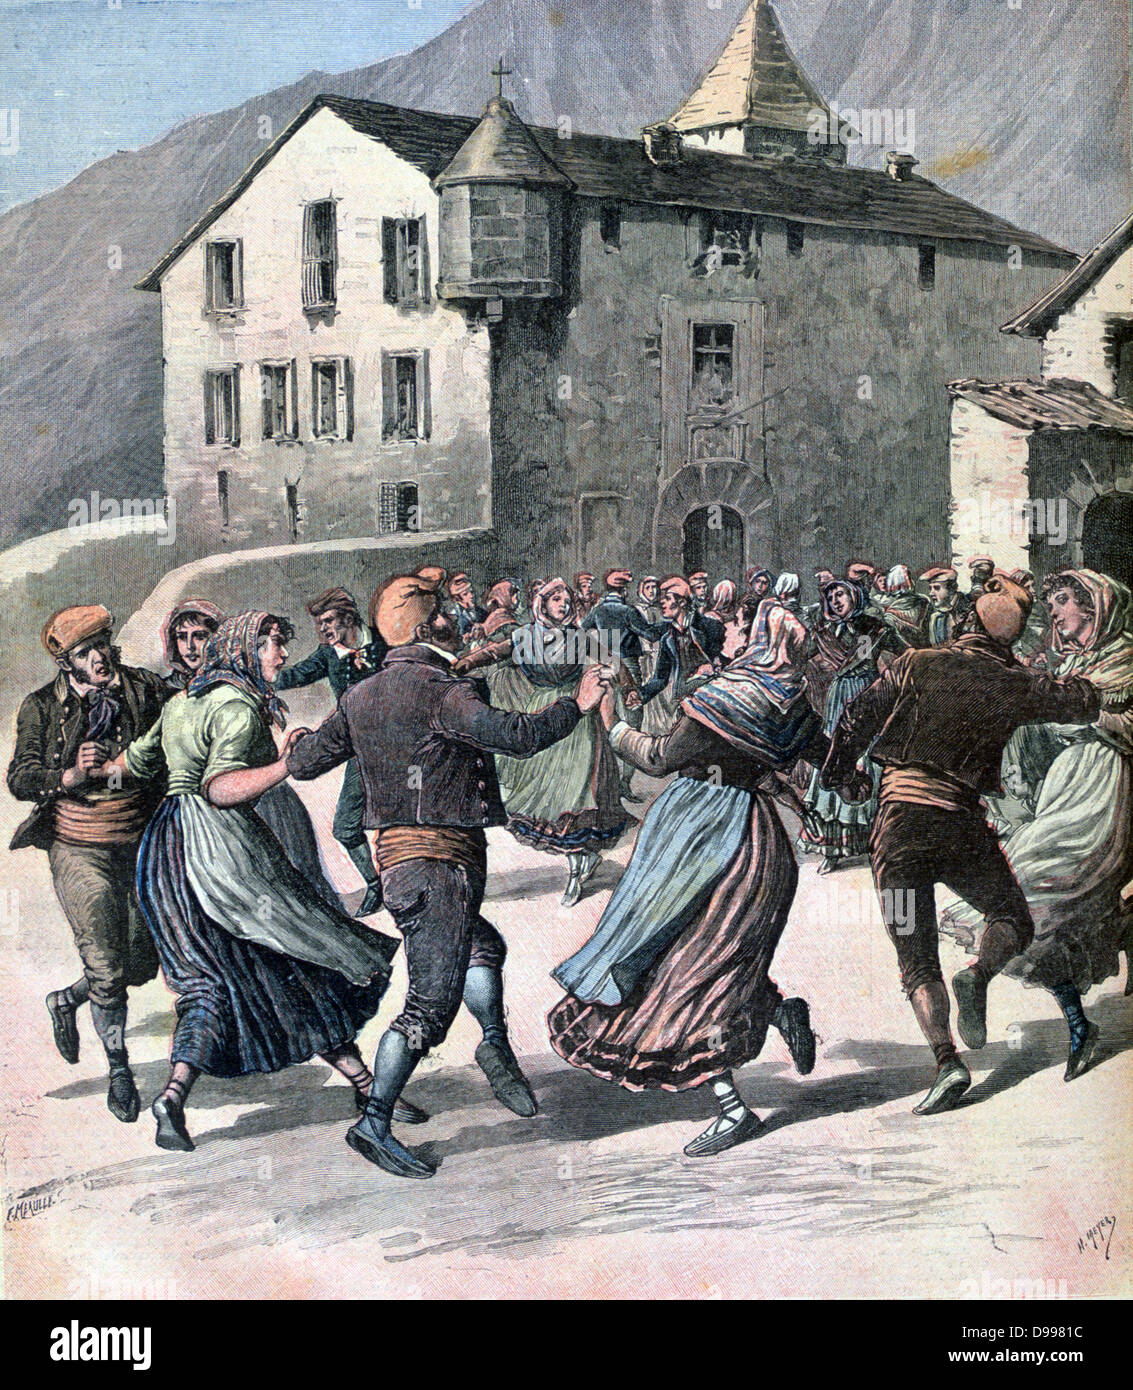 People of Andorra, a Principality in the Pyrenees, dancing the Farandole, a chain community circular dance of medieval origins. From 'Le Petit Journal', Paris, 11 April 1901.  Europe, Mountians, Dance, Folk, Tradition Stock Photo